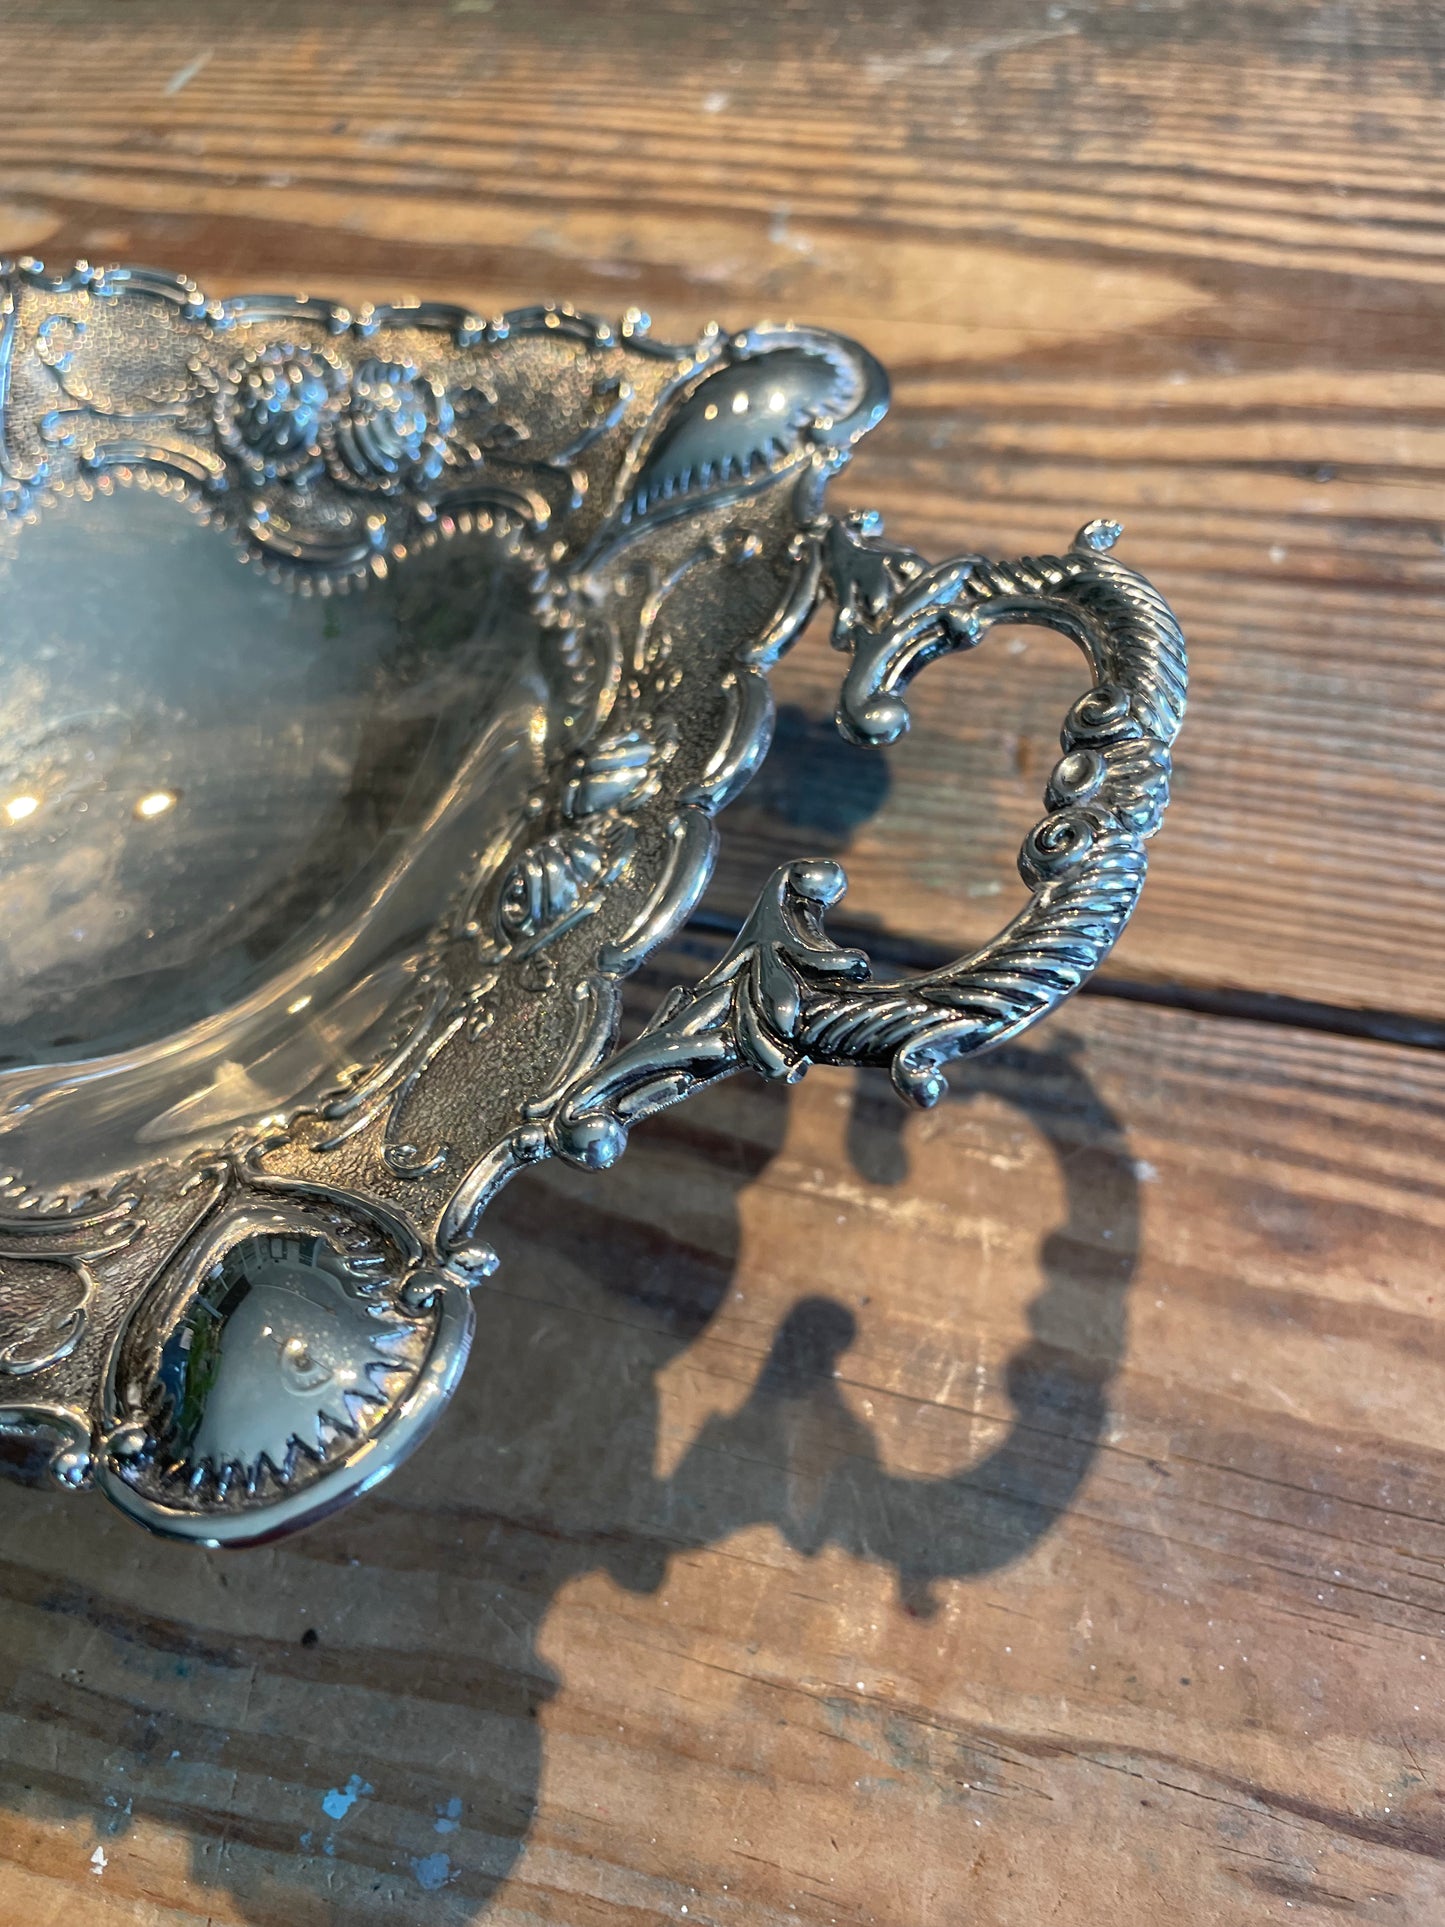 Footed Silver Plate Tray with Handles